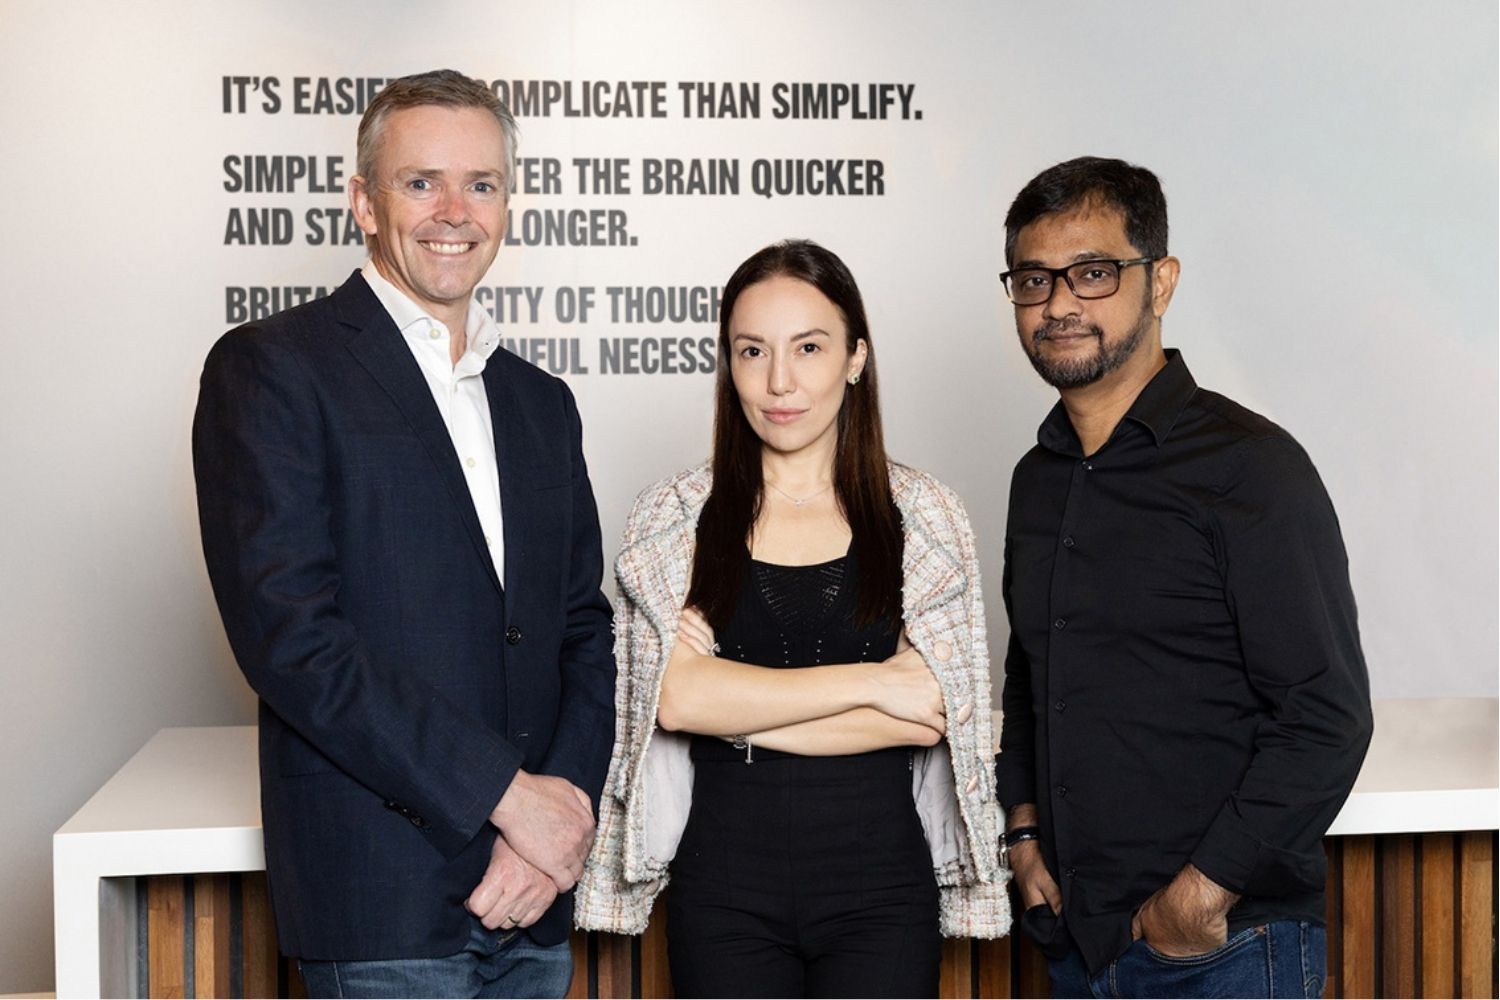 M&C Saatchi Group appoints new CCO and MD to bolster Web3 offering